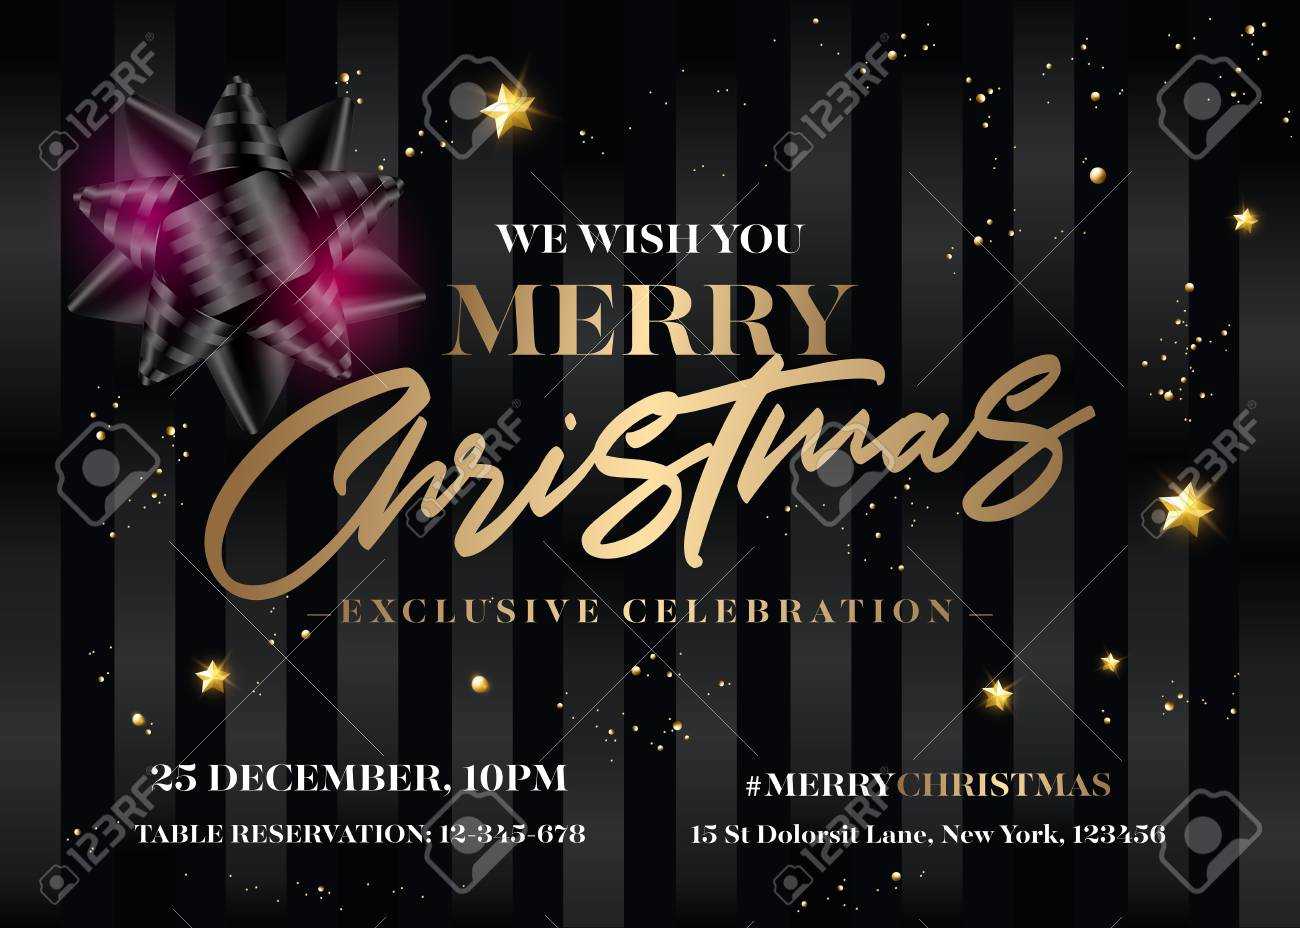 Chirstmas Invitation Card Template. For Table Reservation Card Template